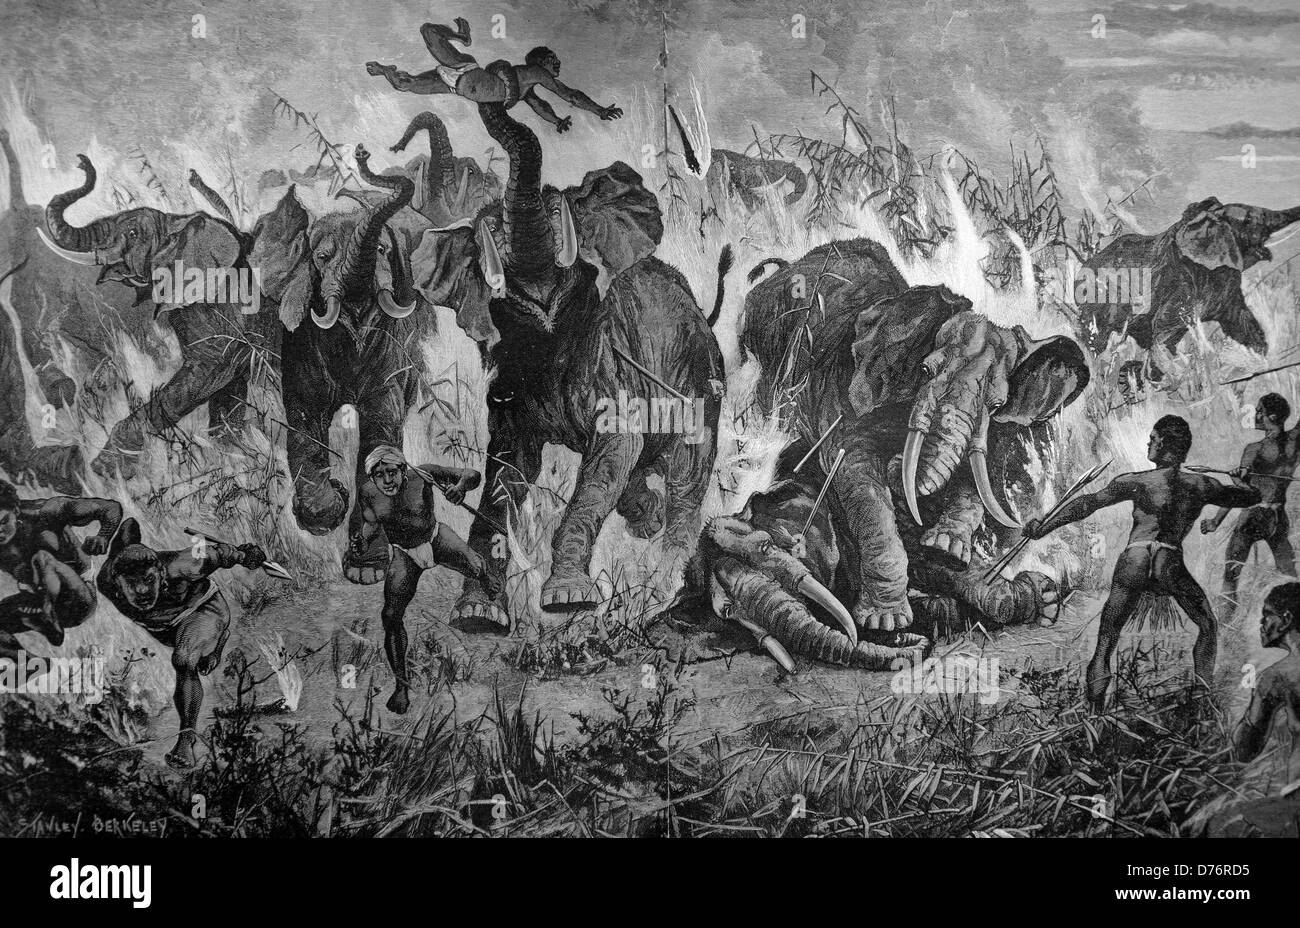 Herd of elephants encircled by fire in battle with natives, South Africa, Africa, woodcut circa 1871 Stock Photo